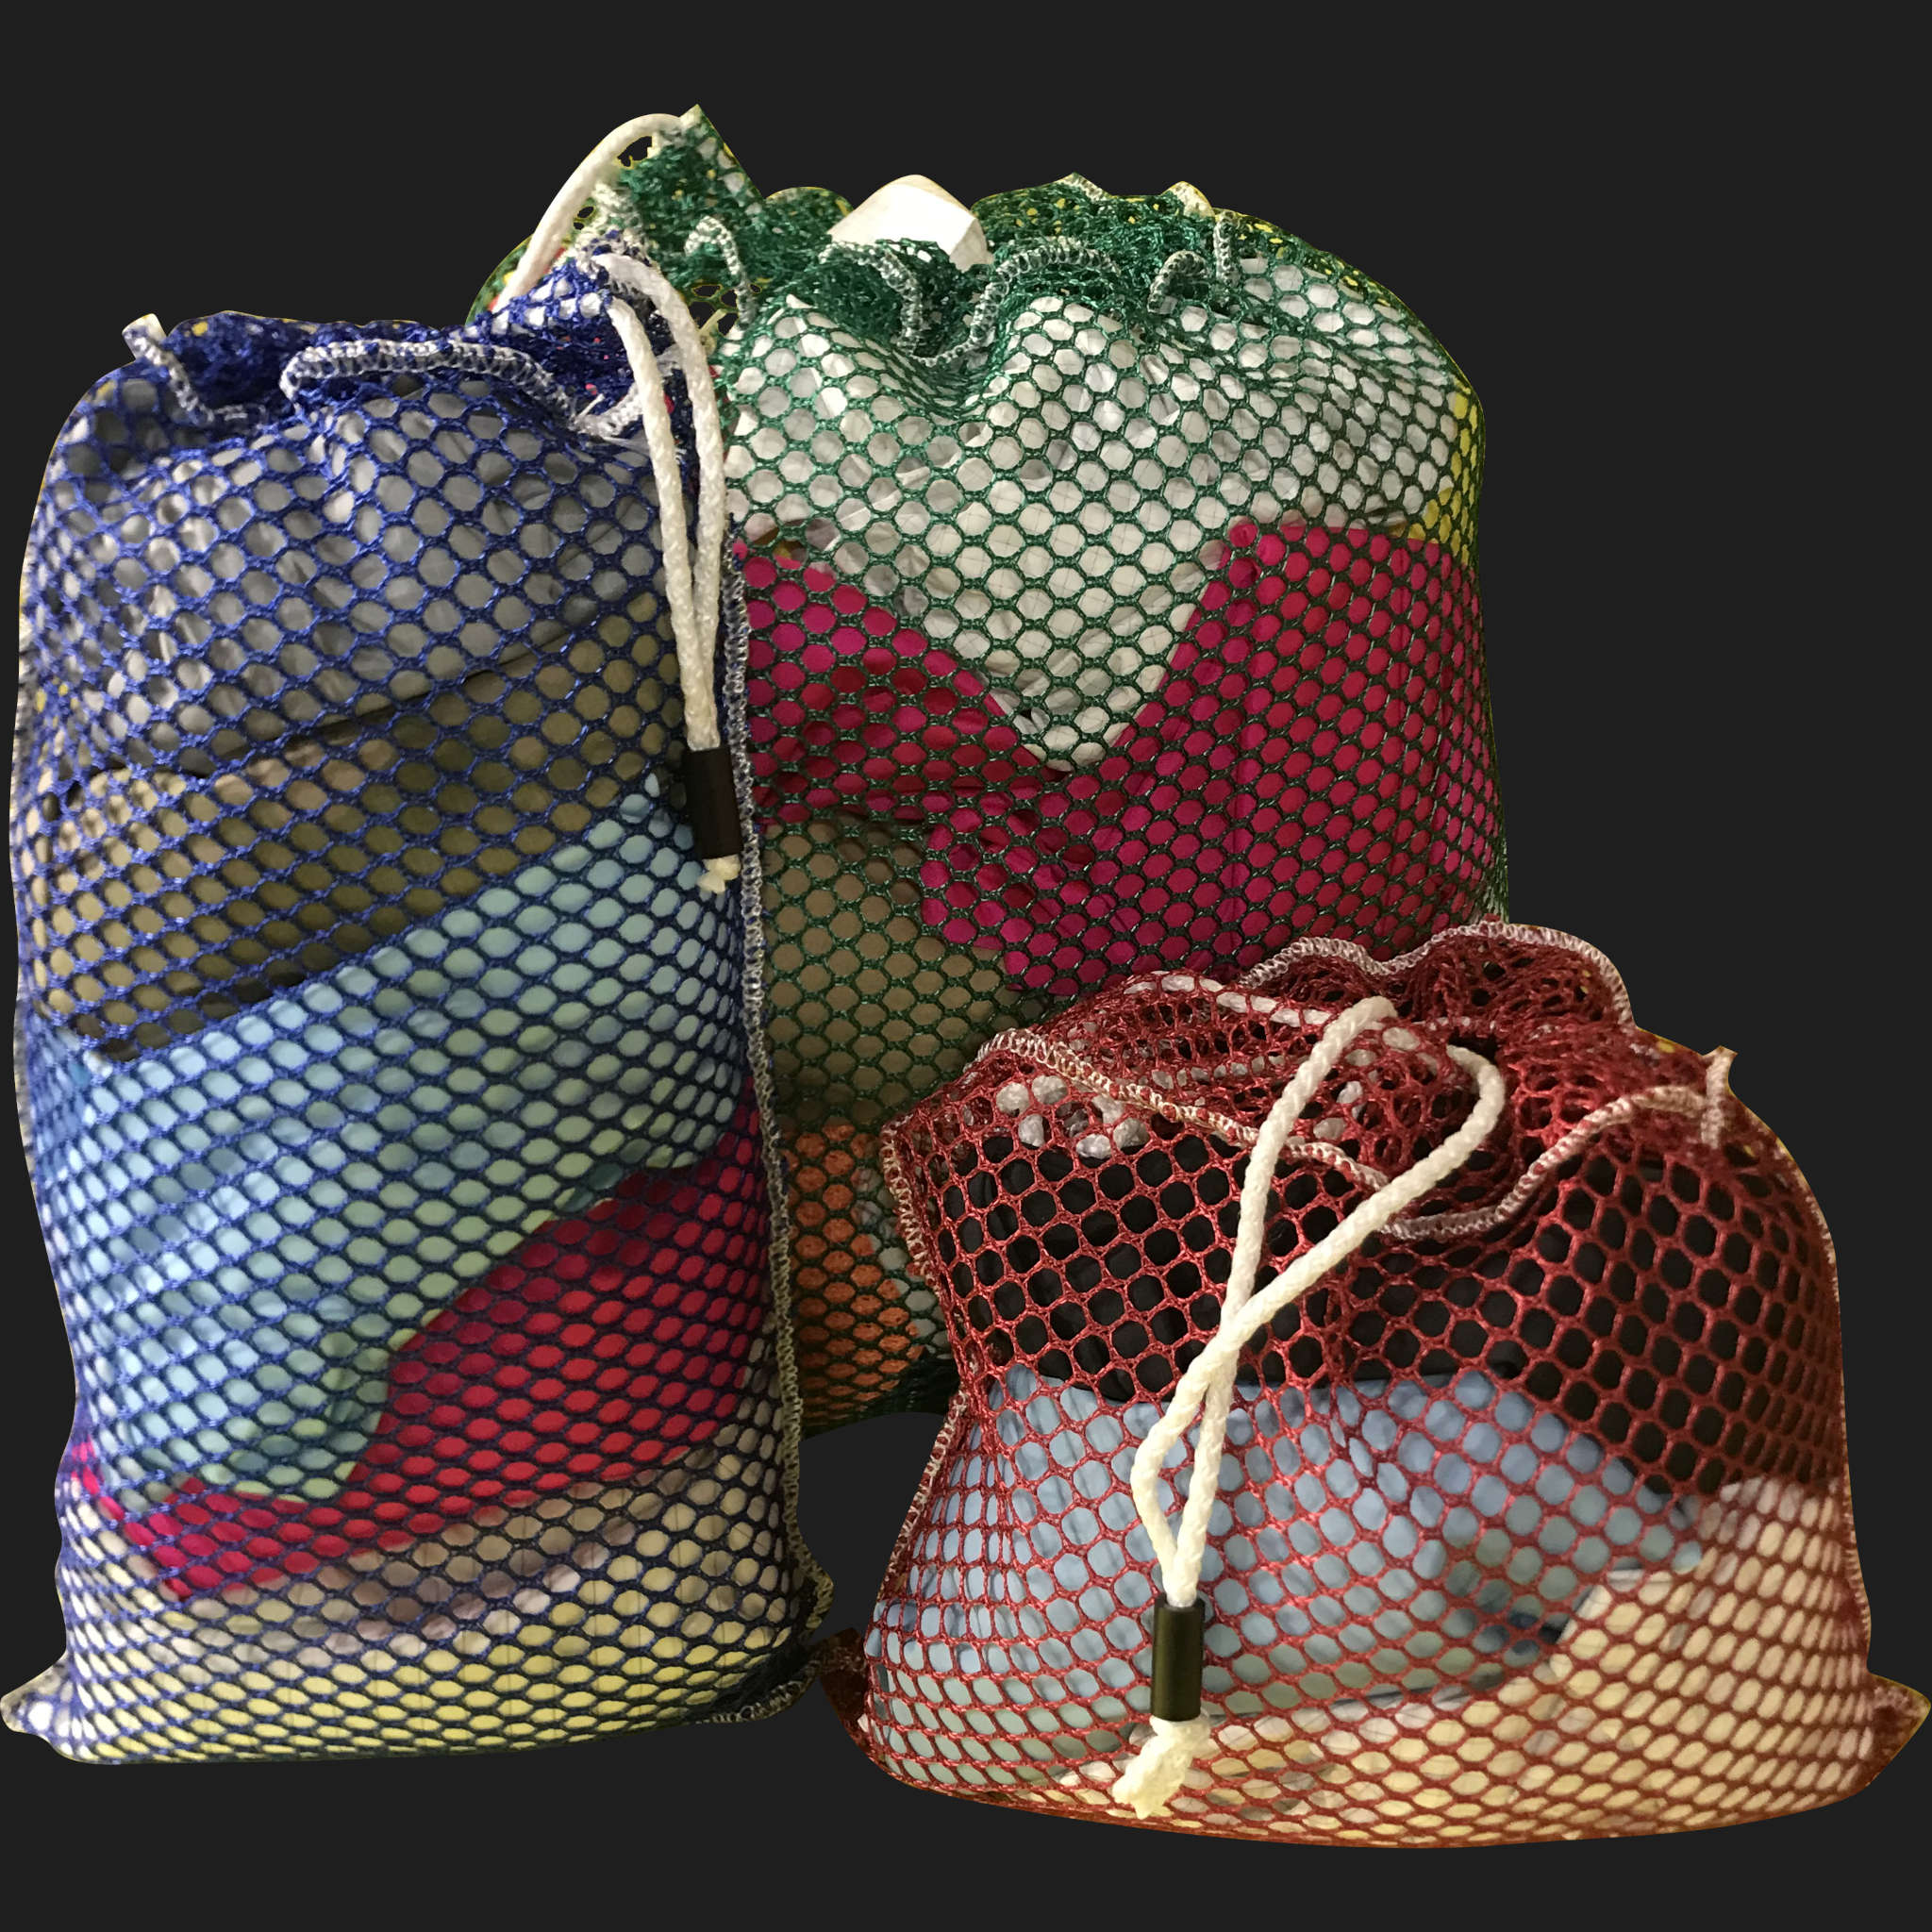 36" x 54" Customized Mesh-Net-Laundry Bags Heavy Duty with Cord and barrellock closure